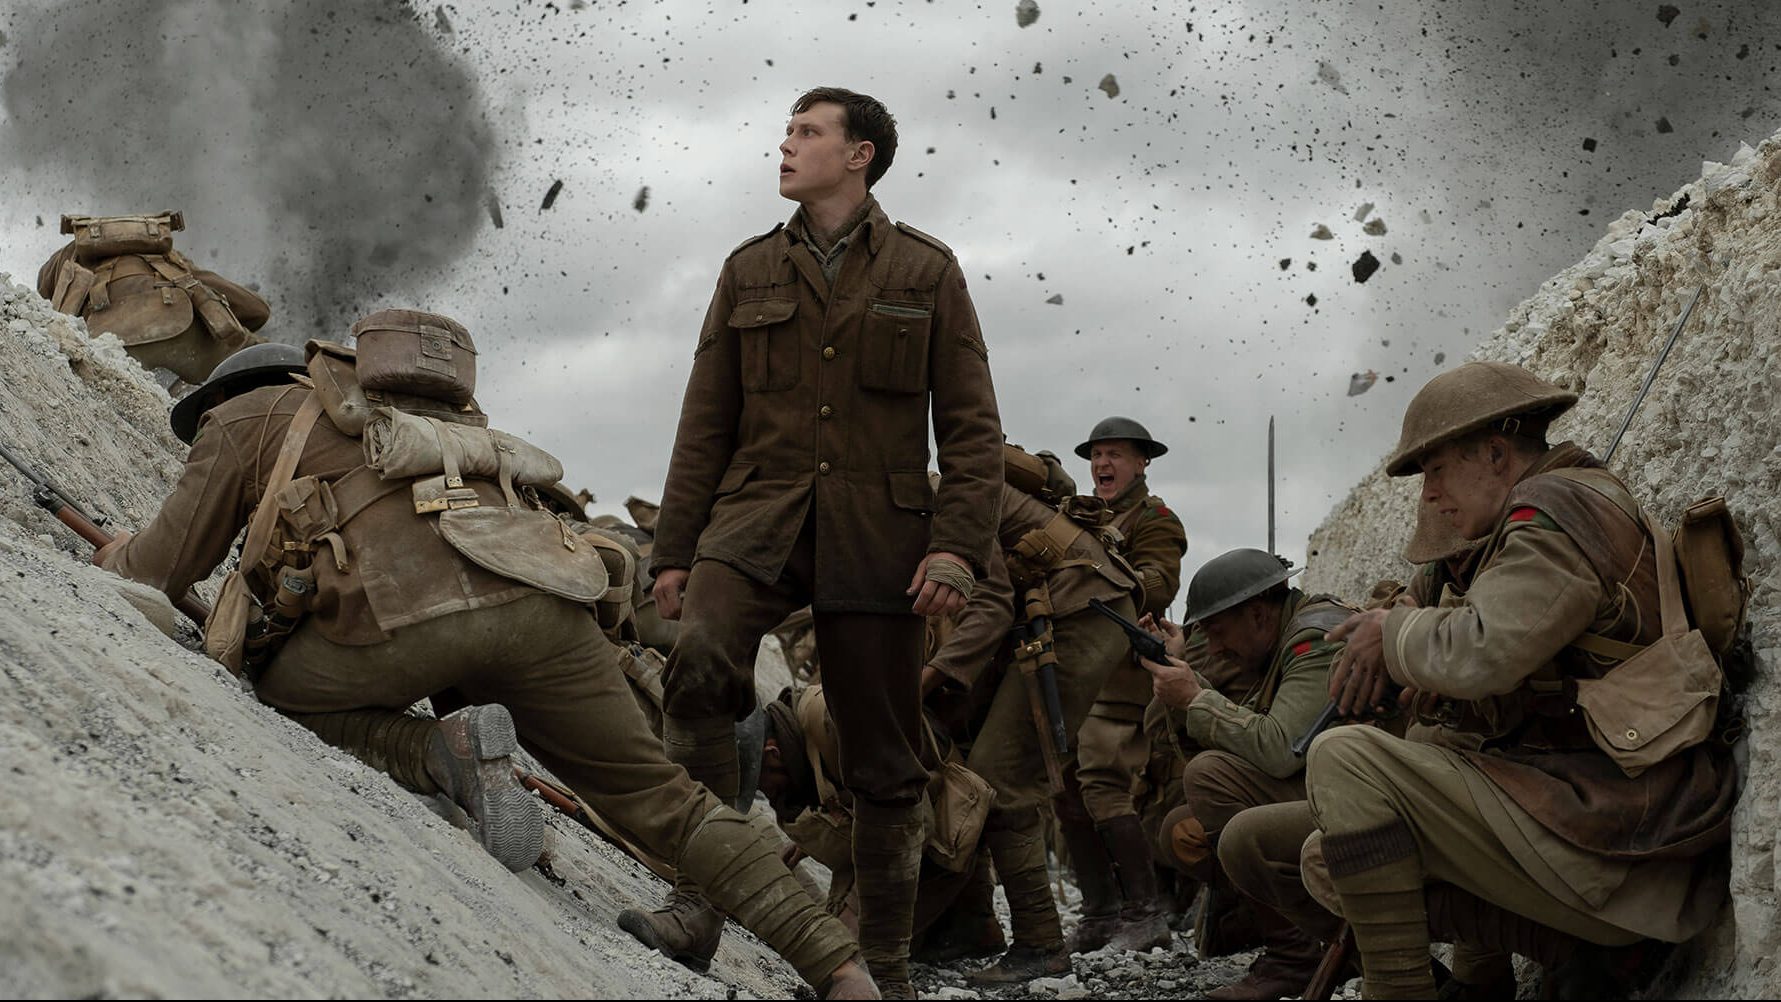 WWI drama 1917 is one of the most realistic war movies of all time